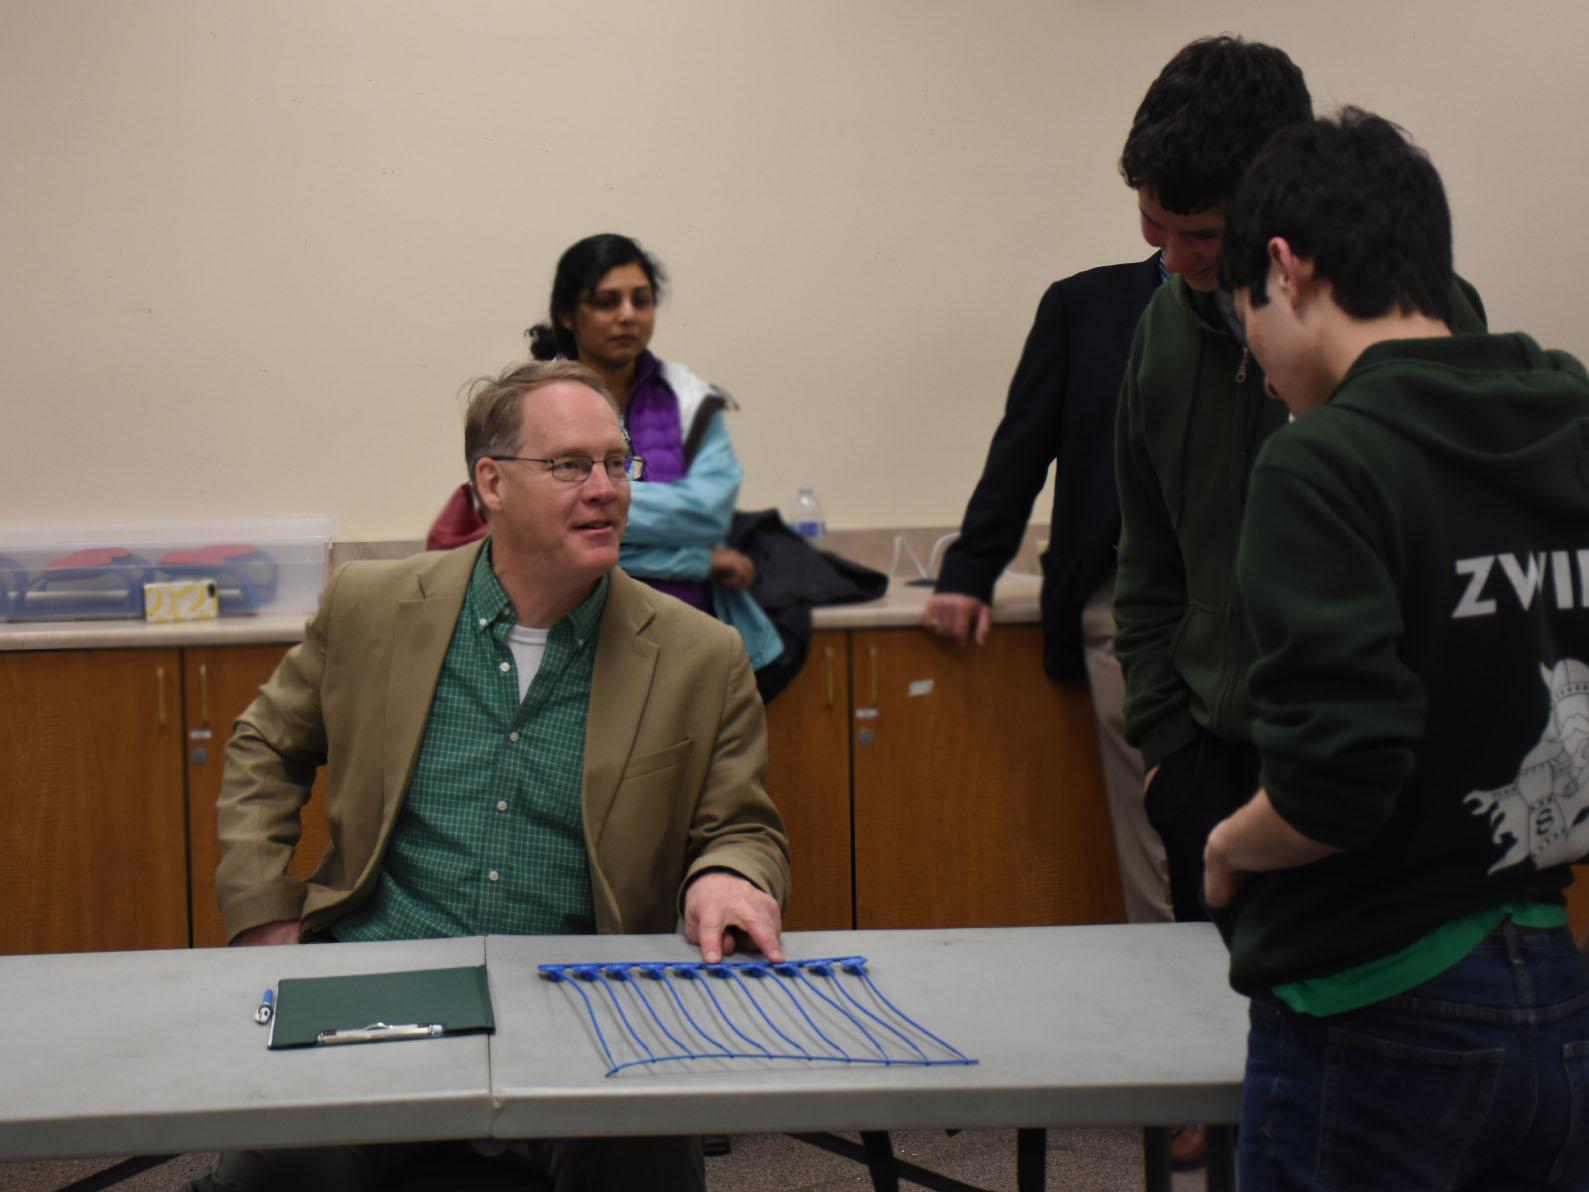 After reflecting on his time, Kuszmaul said he was most proud of acting as the adviser for the school robotics team. "This is my sixth year at Paly," Kuszmaul said. "My [crowning achievement] would be the robotics team and how it functions," Kuszmaul said. Photo: David Ely